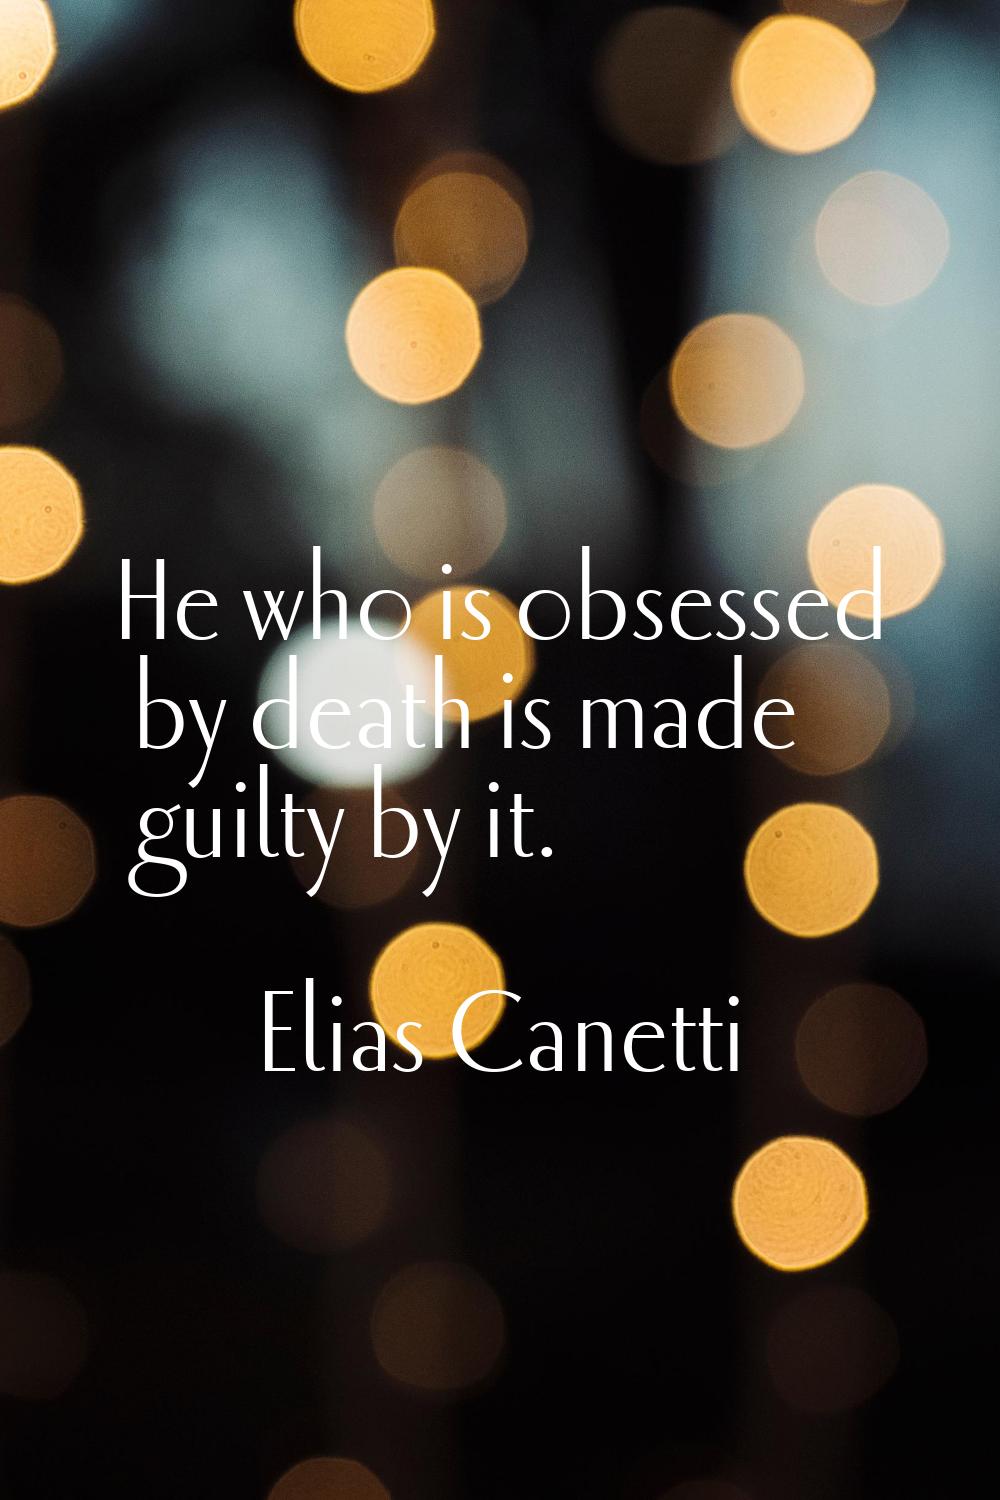 He who is obsessed by death is made guilty by it.